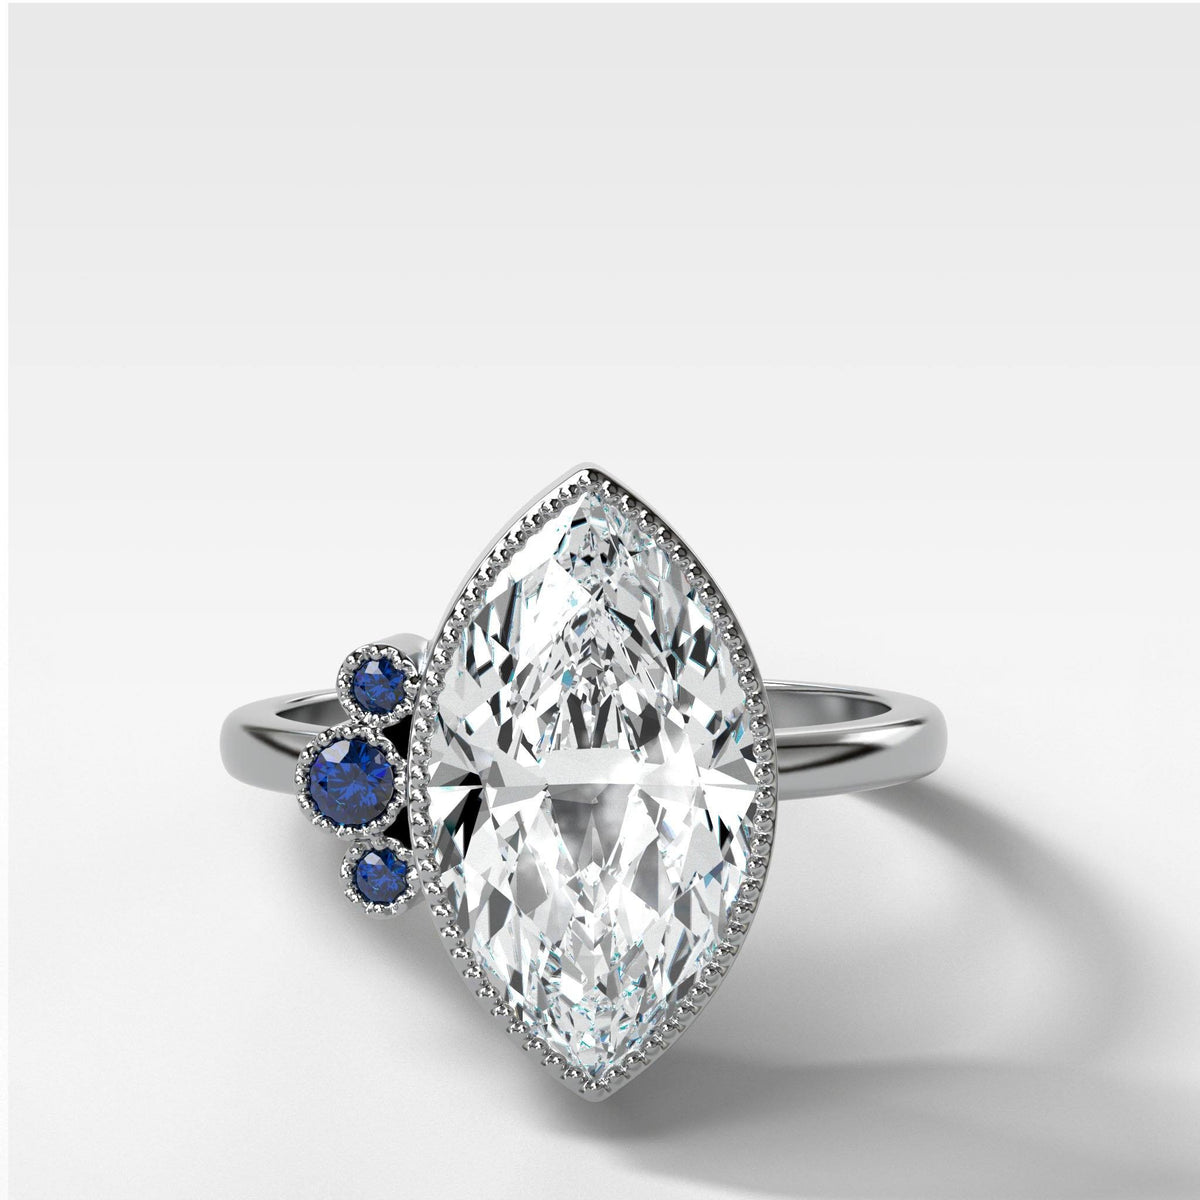 Blue Cluster Engagement Ring With Marquise Cut by Good Stone in White Gold